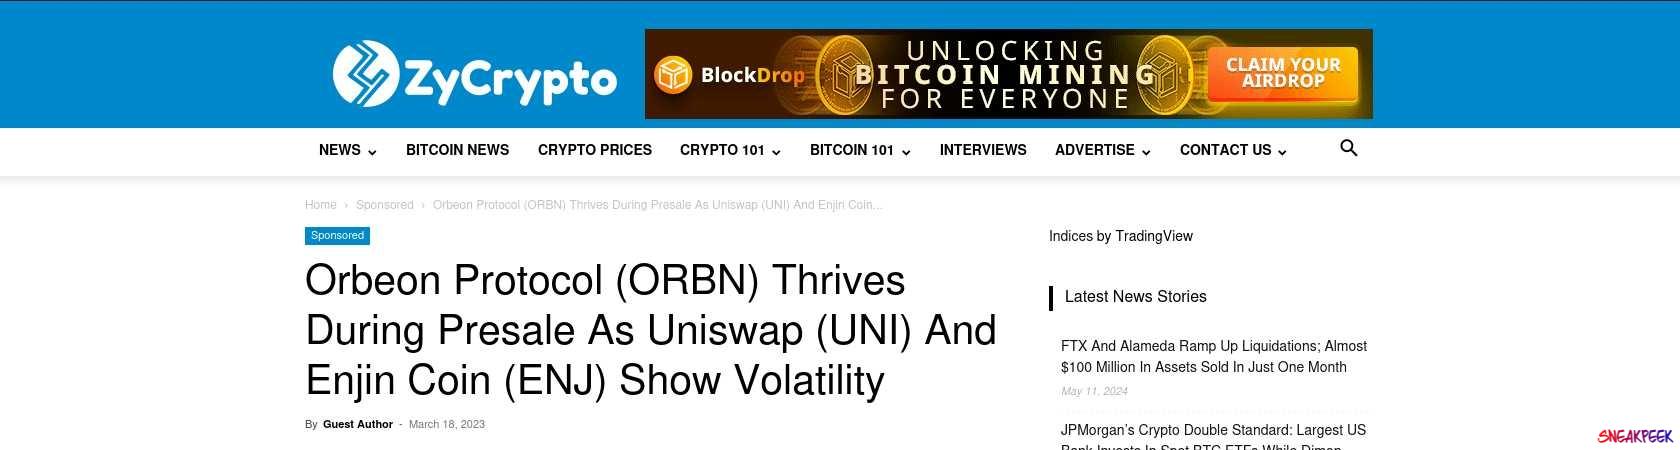 Read the full Article:  ⭲ Orbeon Protocol (ORBN) Thrives During Presale As Uniswap (UNI) And Enjin Coin (ENJ) Show Volatility